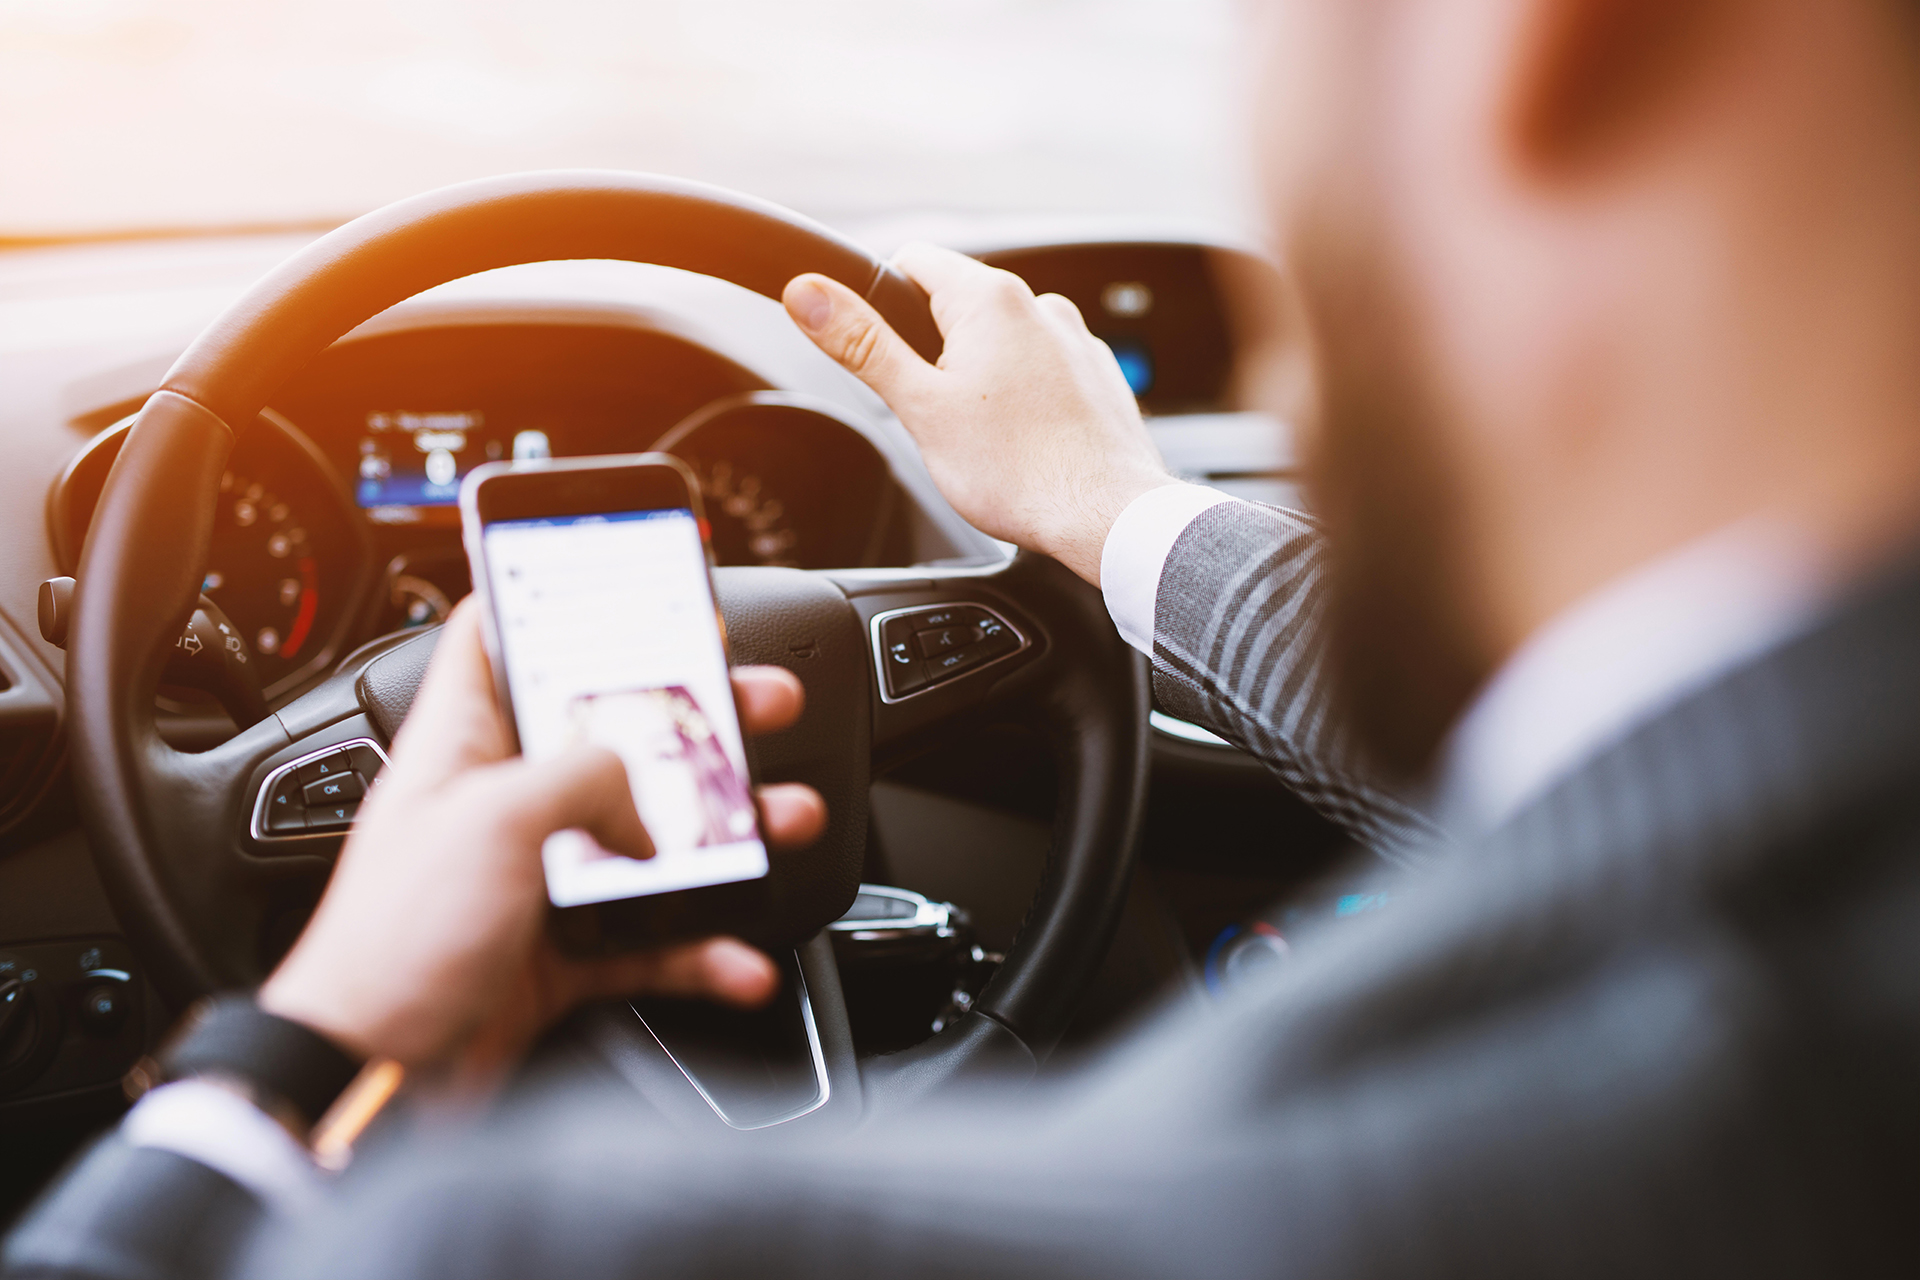 Man Driving While Holding Cellphone